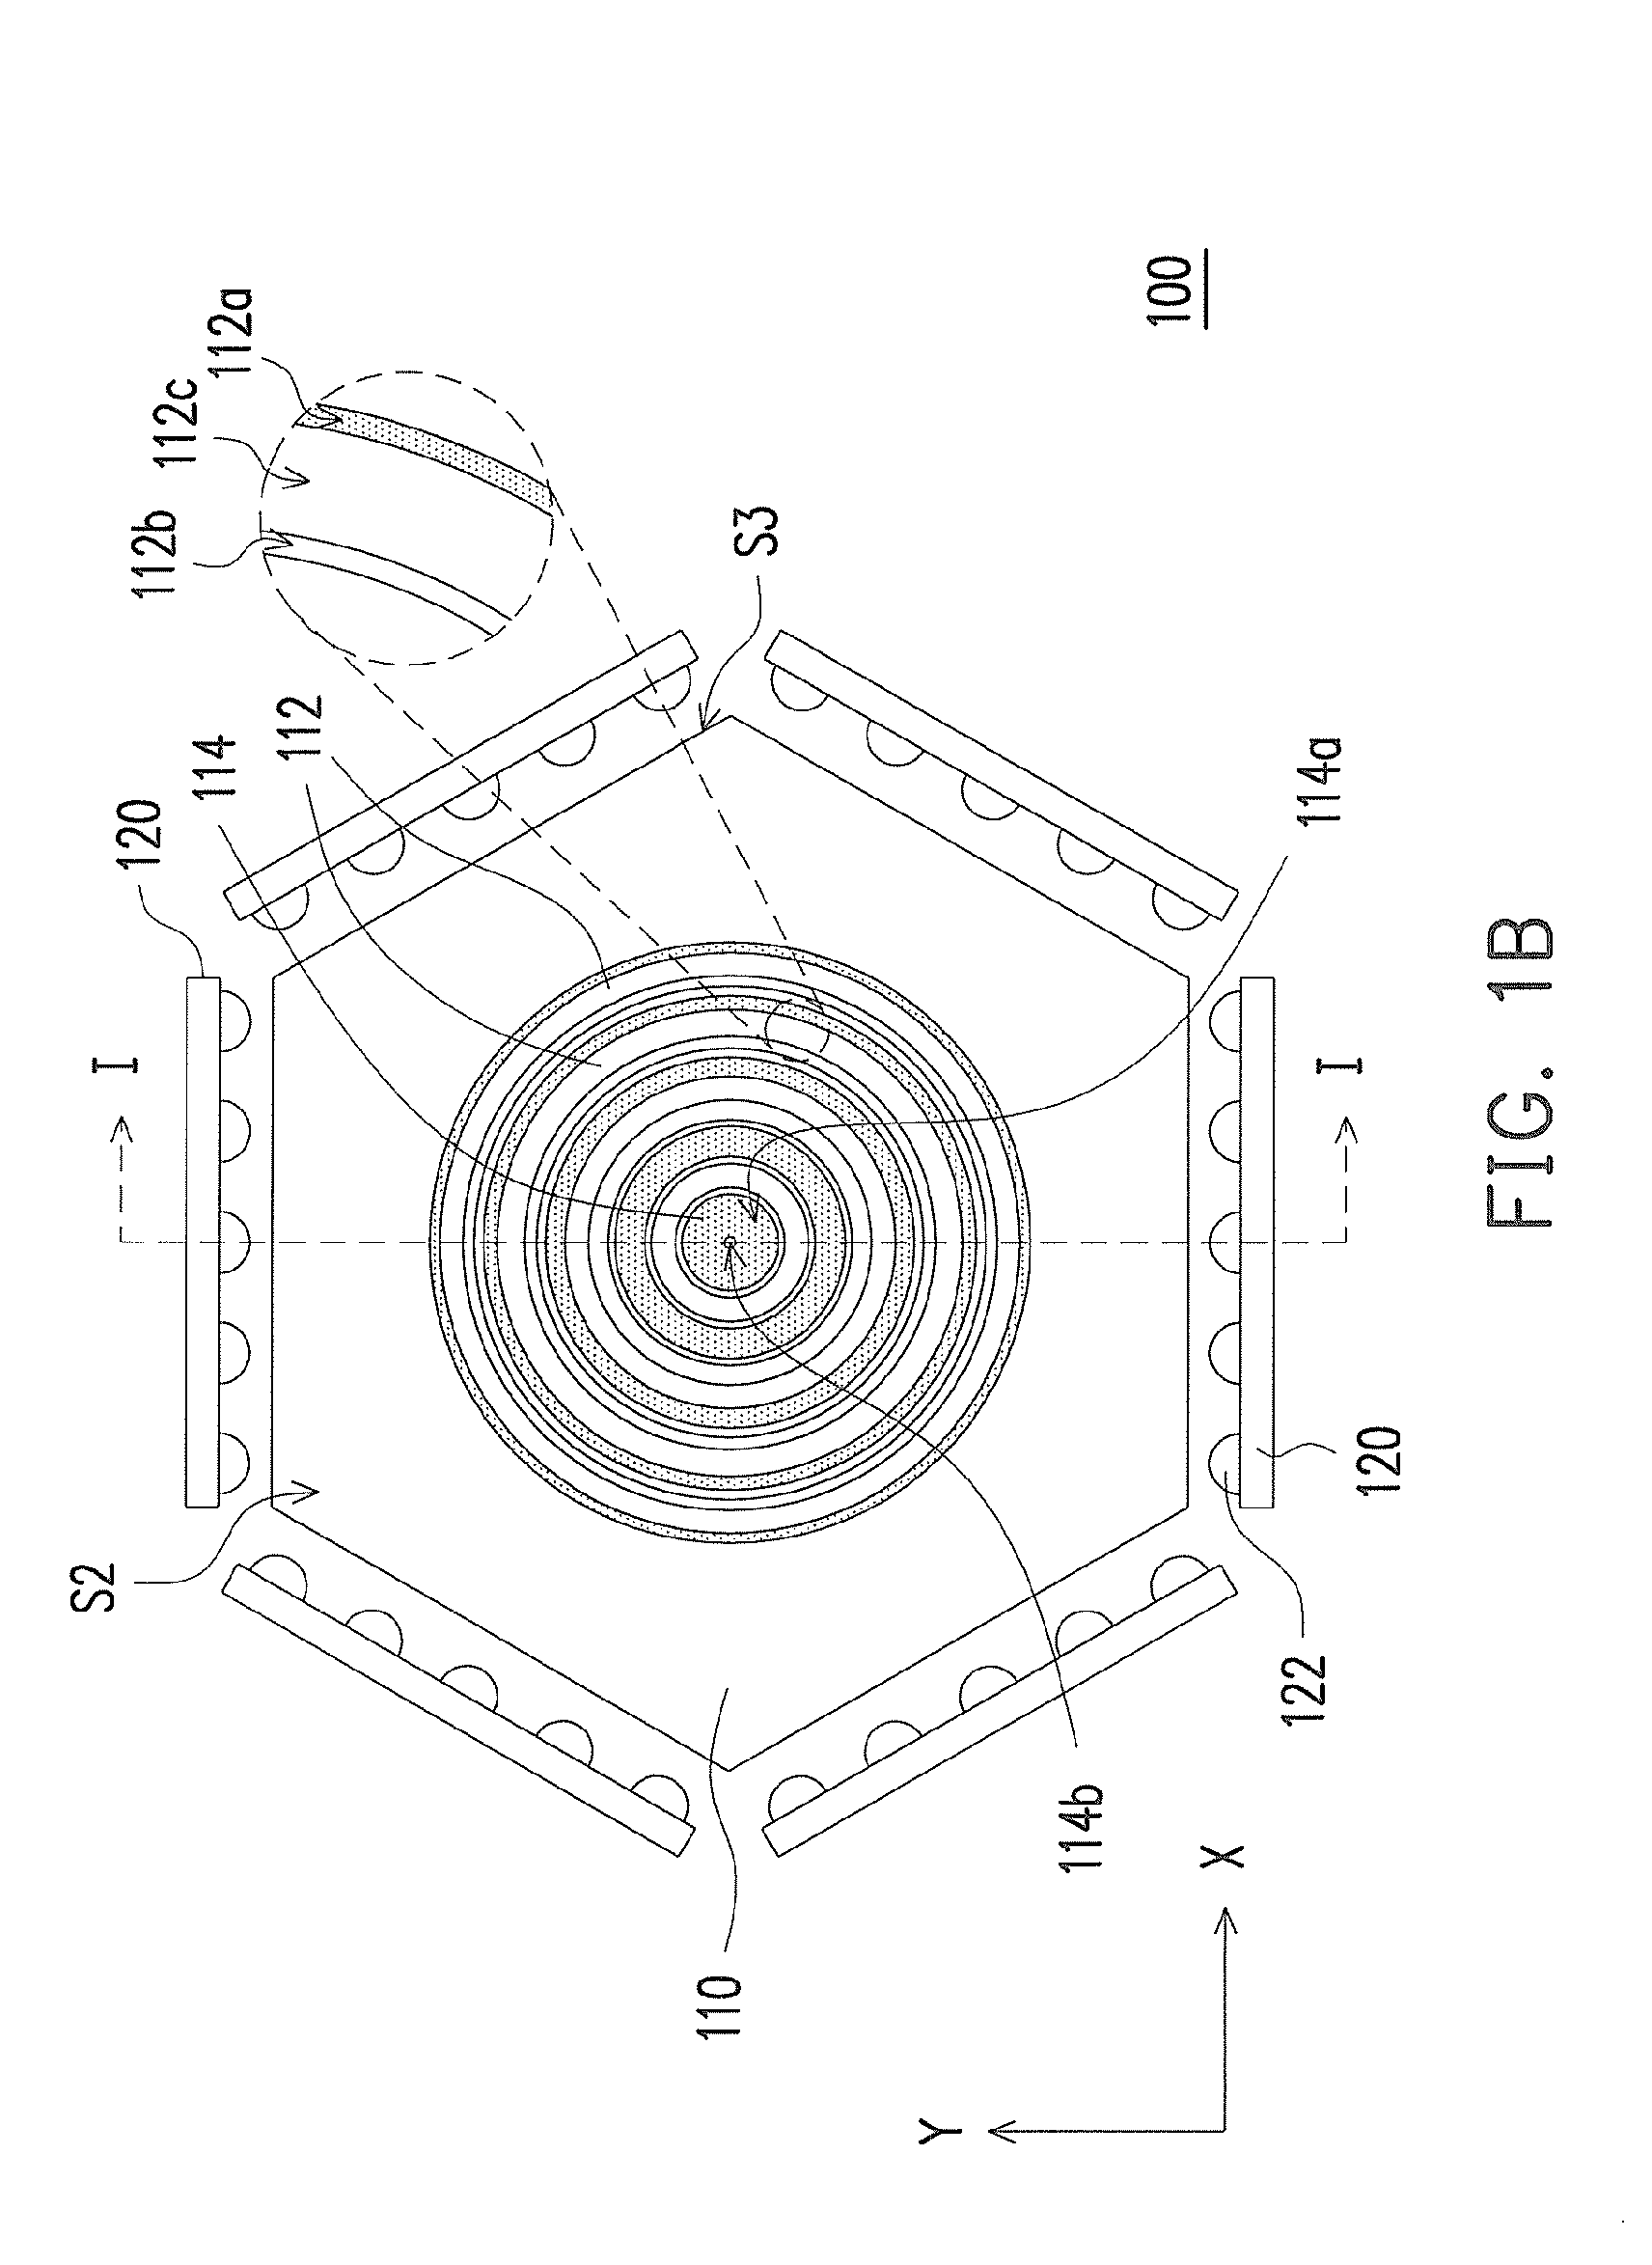 Light guide plate and light source apparatus